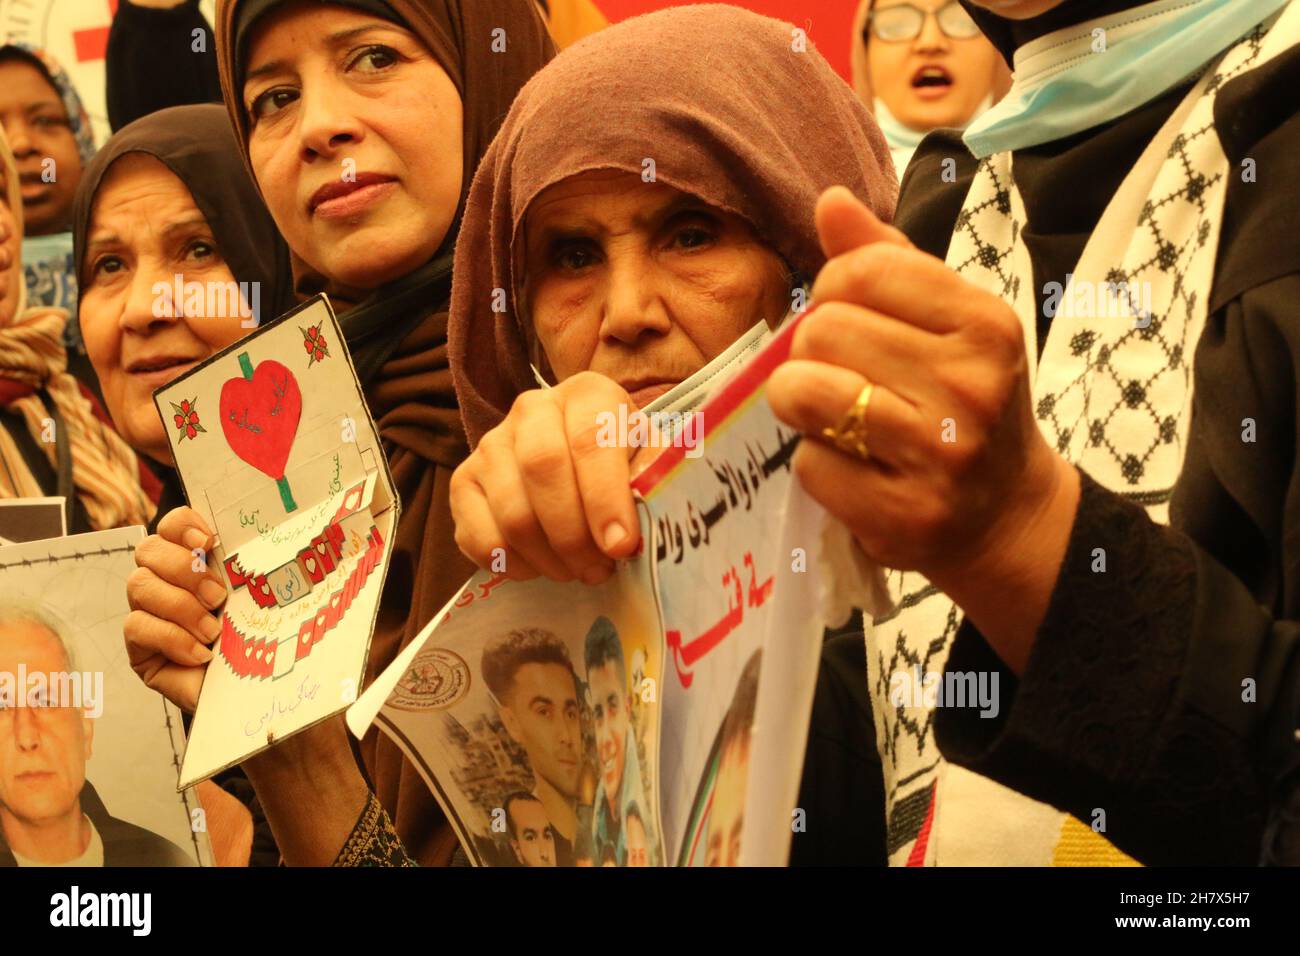 Palestinians join a protest inside the headquarters of Red Cross and demand the corpses of Doihems dead held by Israeli, in Gaza City on Nov 22, 2021. Stock Photo